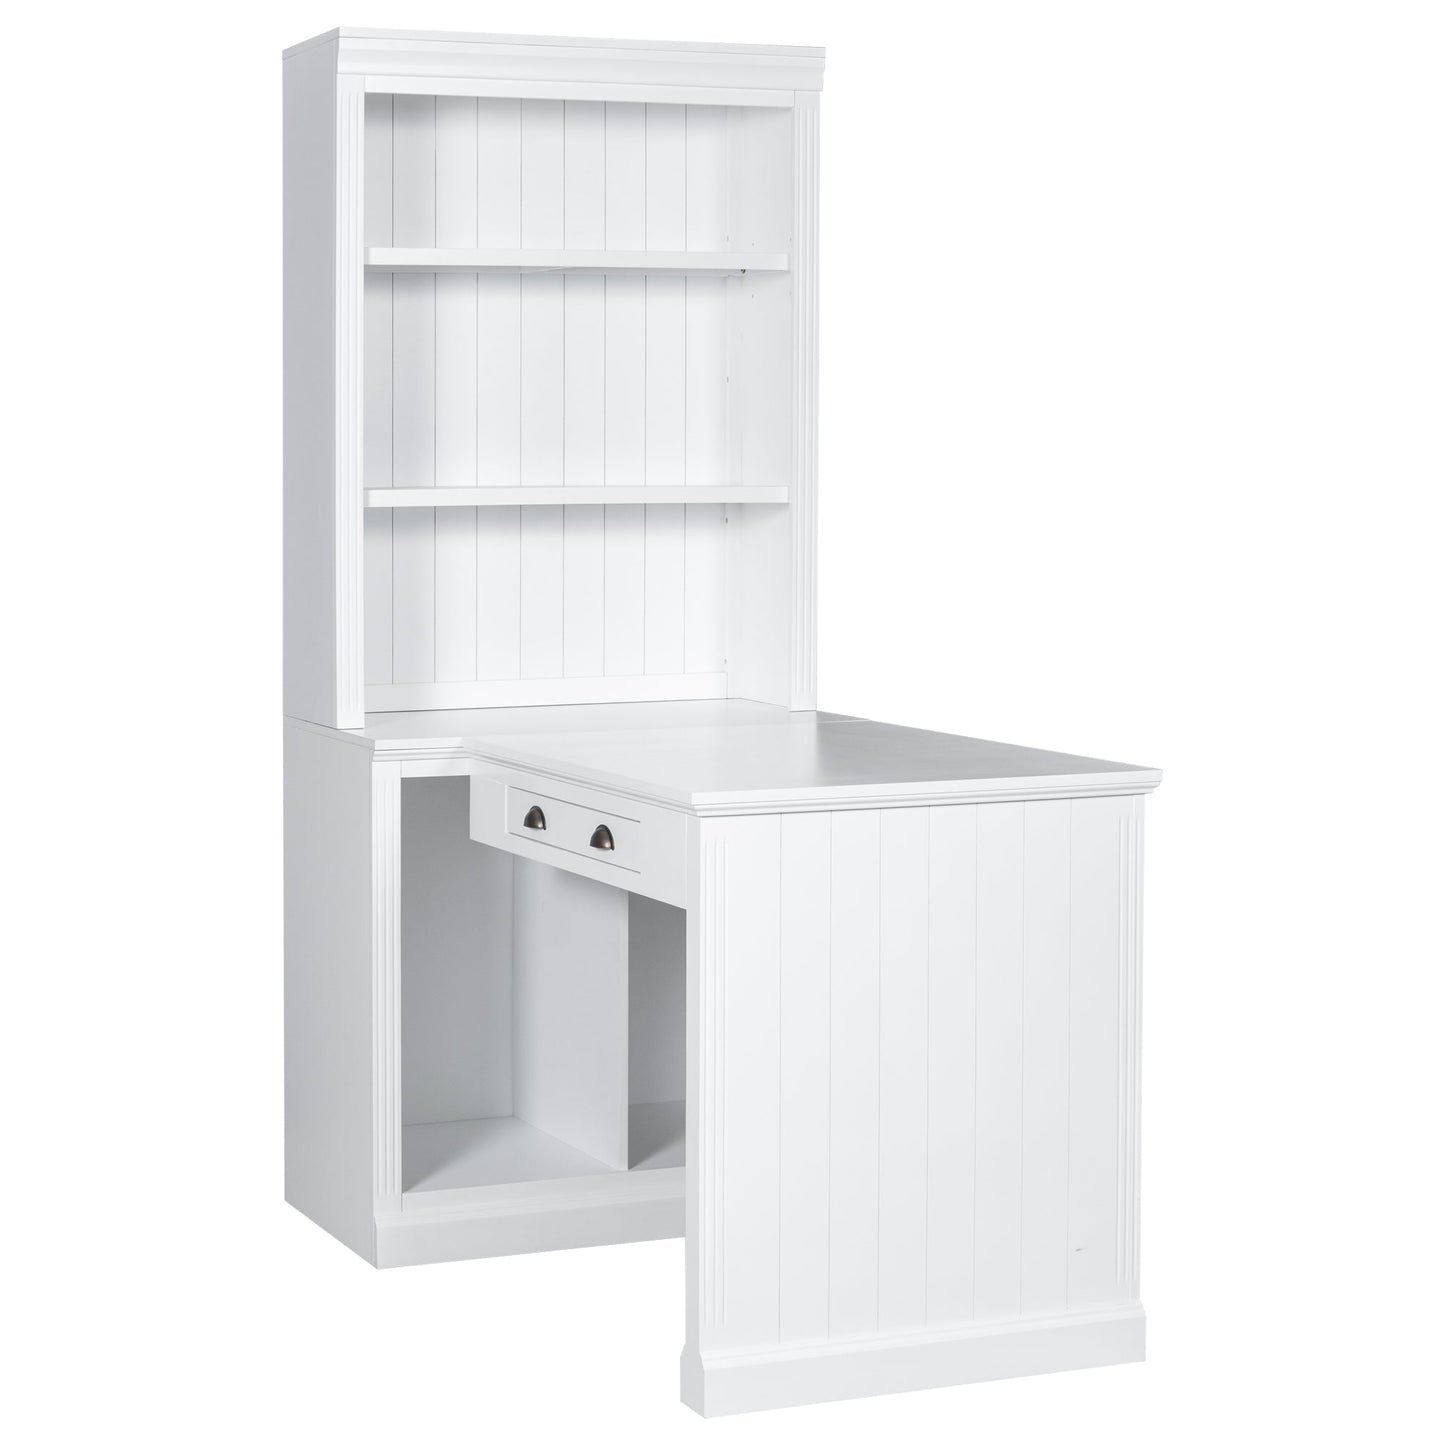 83.4"Tall Bookshelf with Writing Desk, Modern Bookcase with Study Desk, Workstation with Storage Shelf,Storage Bookcase with Open Shelves and LED Lighting for Living Room,Home Office,White